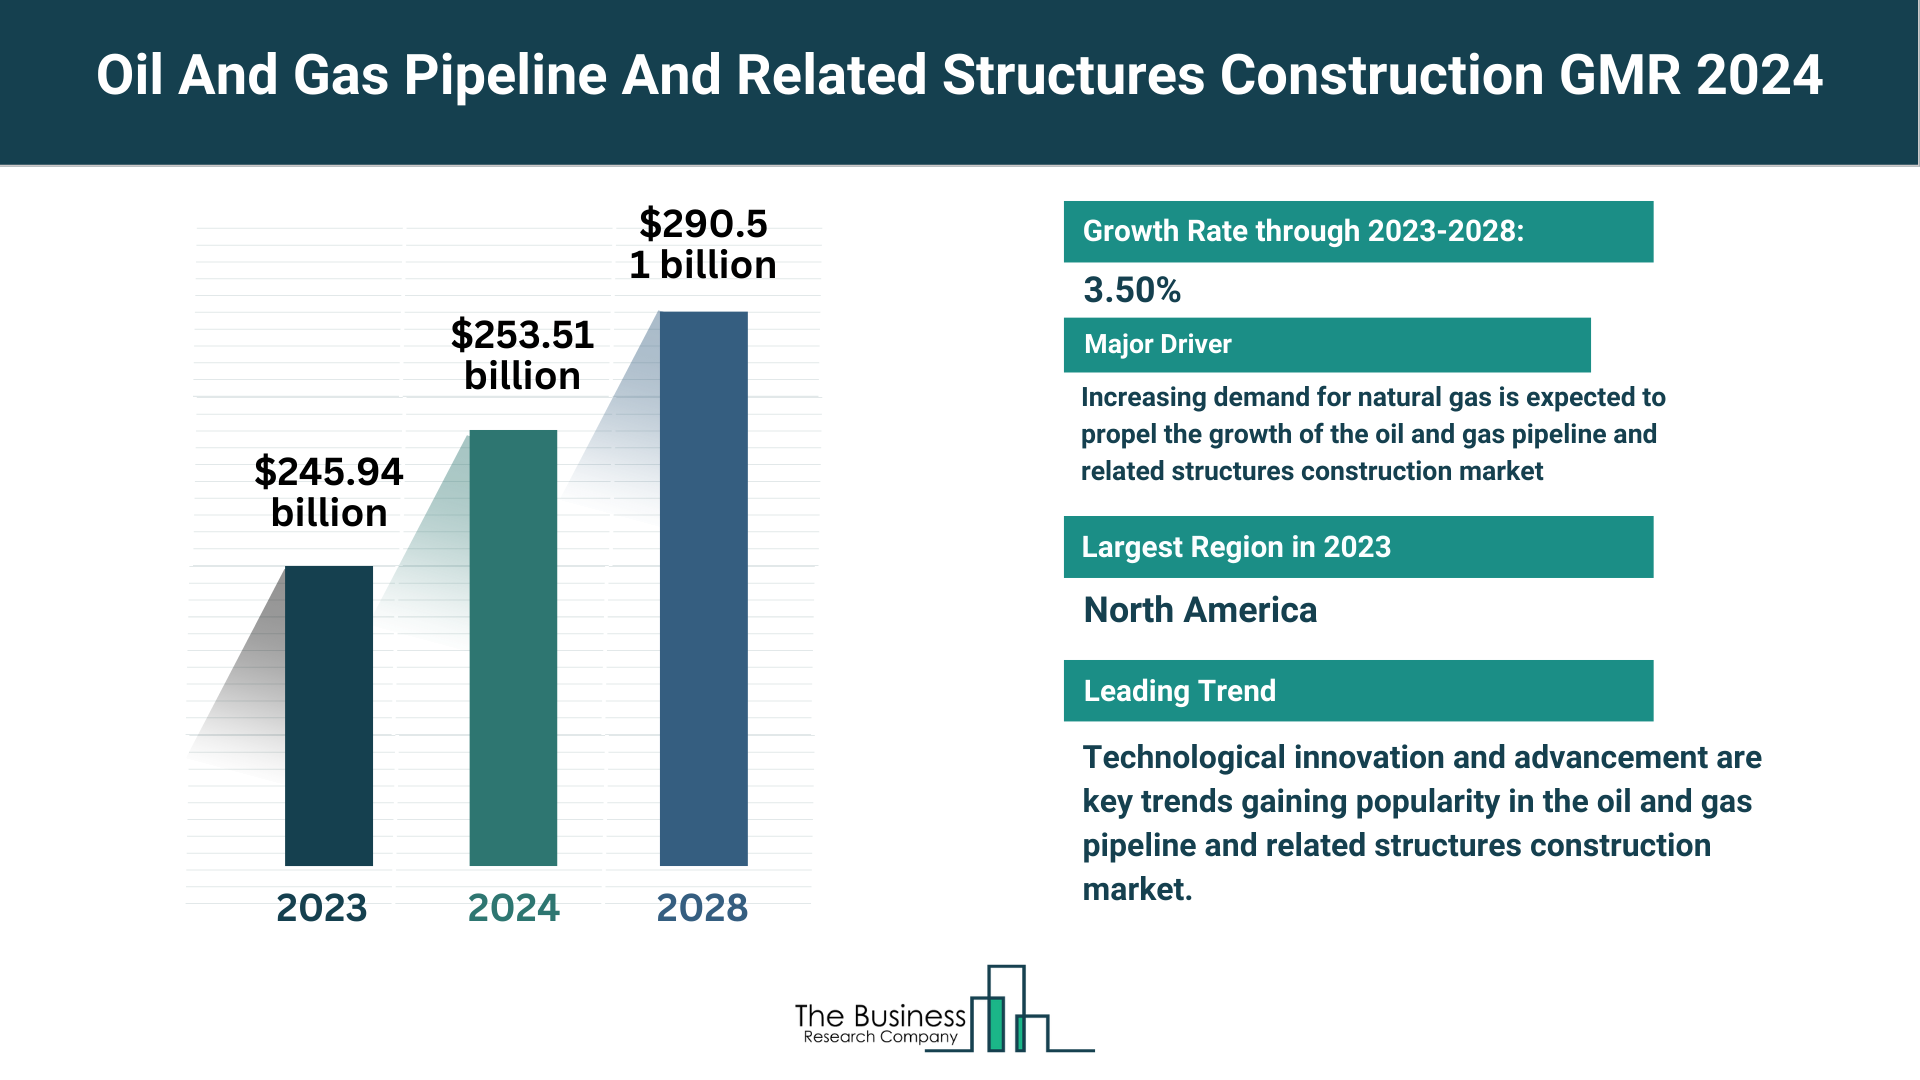 What Are The 5 Takeaways From The Oil And Gas Pipeline And Related Structures Construction Market Overview 2024